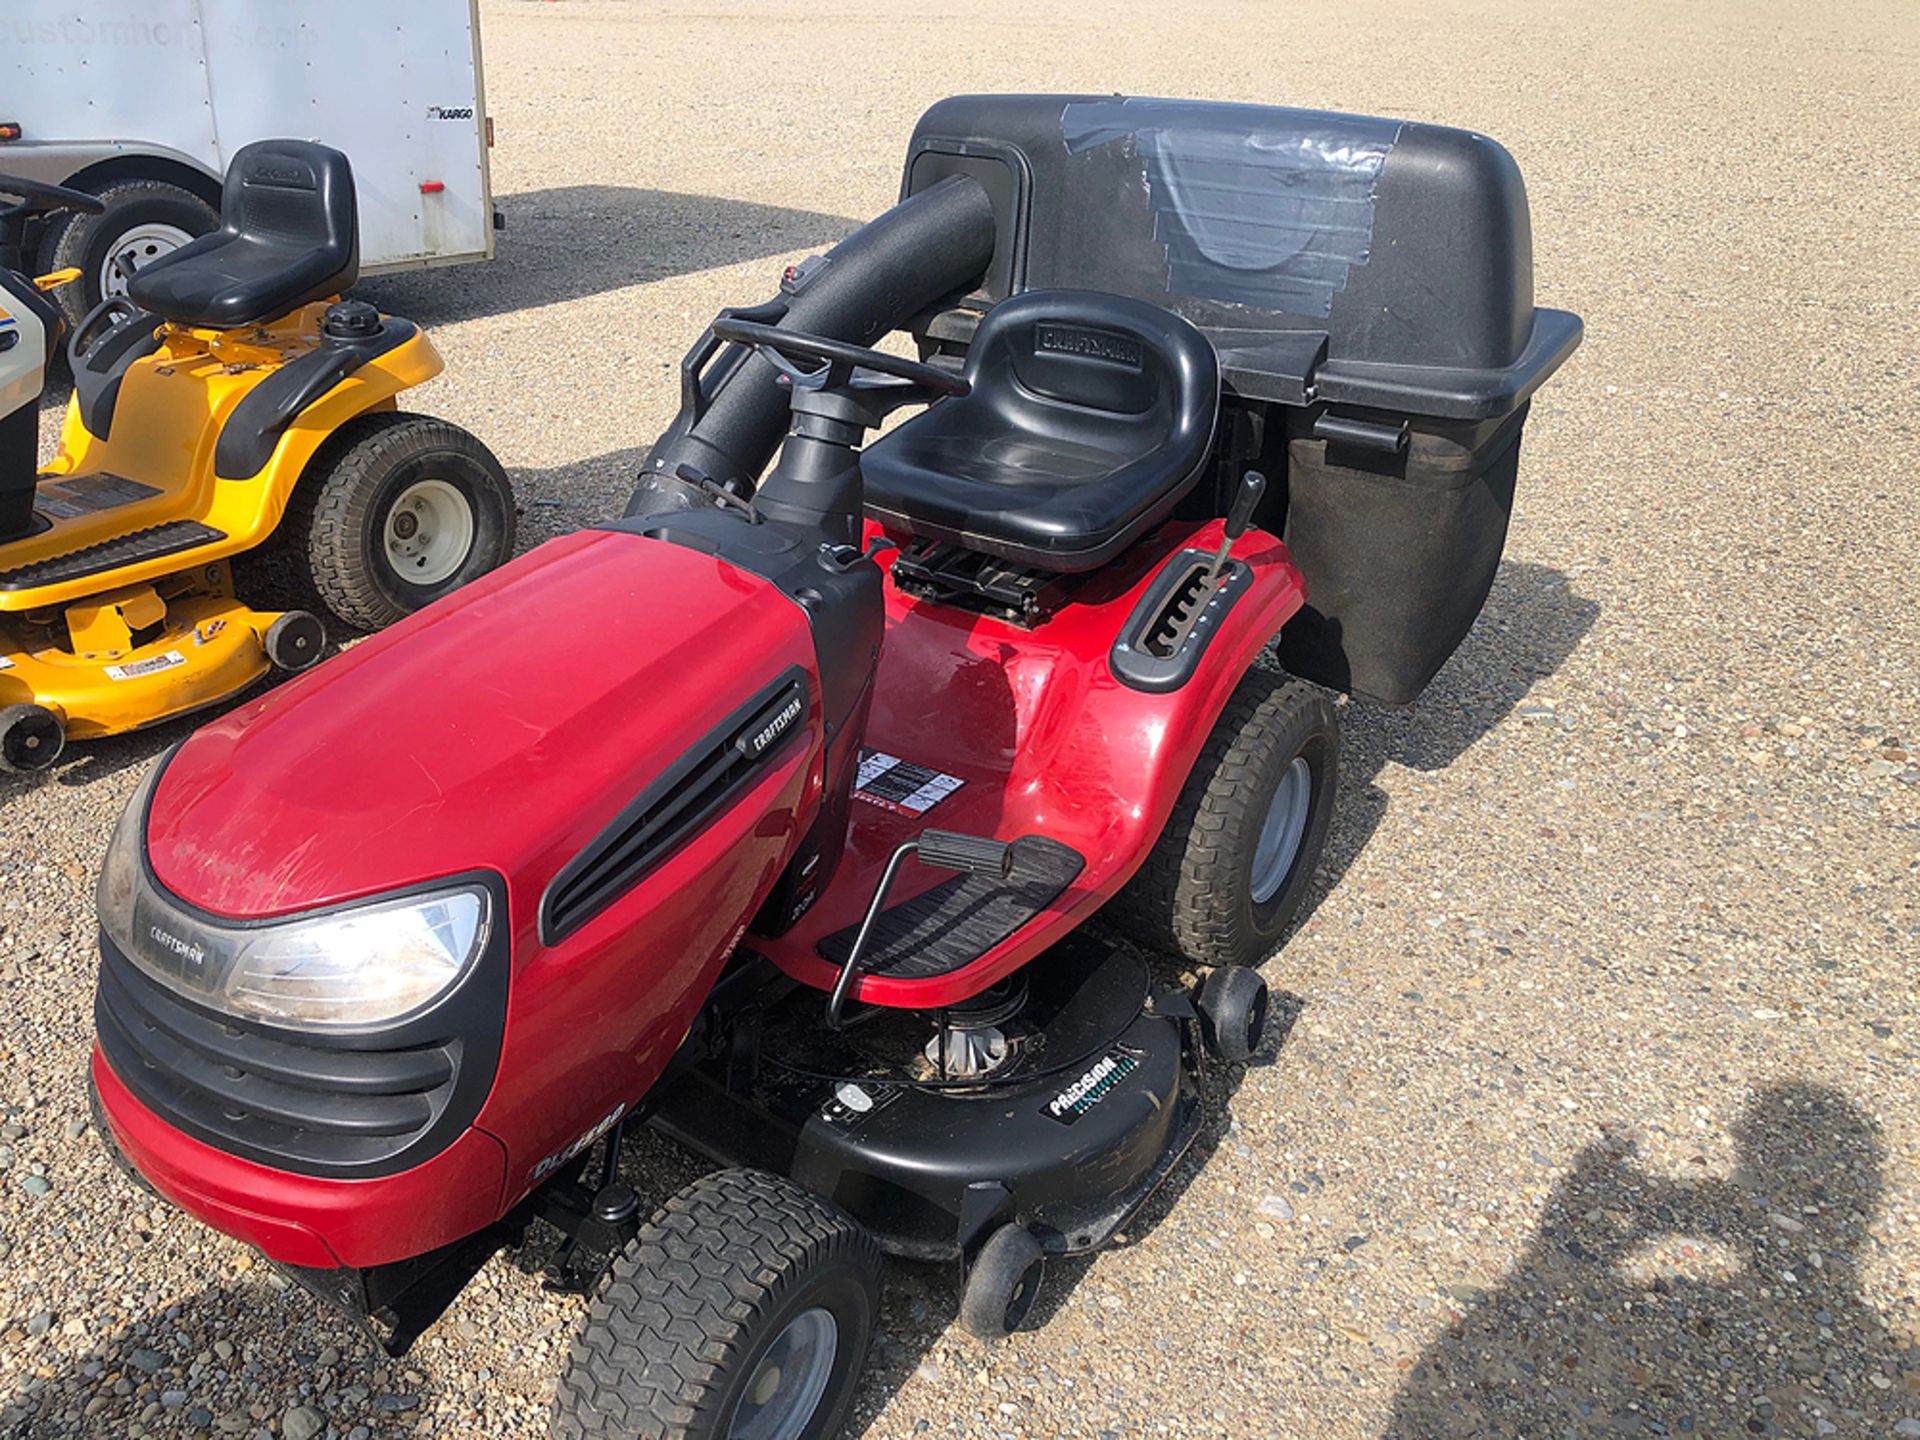 CRAFTSMAN RIDING LAWN TRACTOR WITH 42" DECK AND BAGGER, BRIGGS AND STRATTON ENGINE